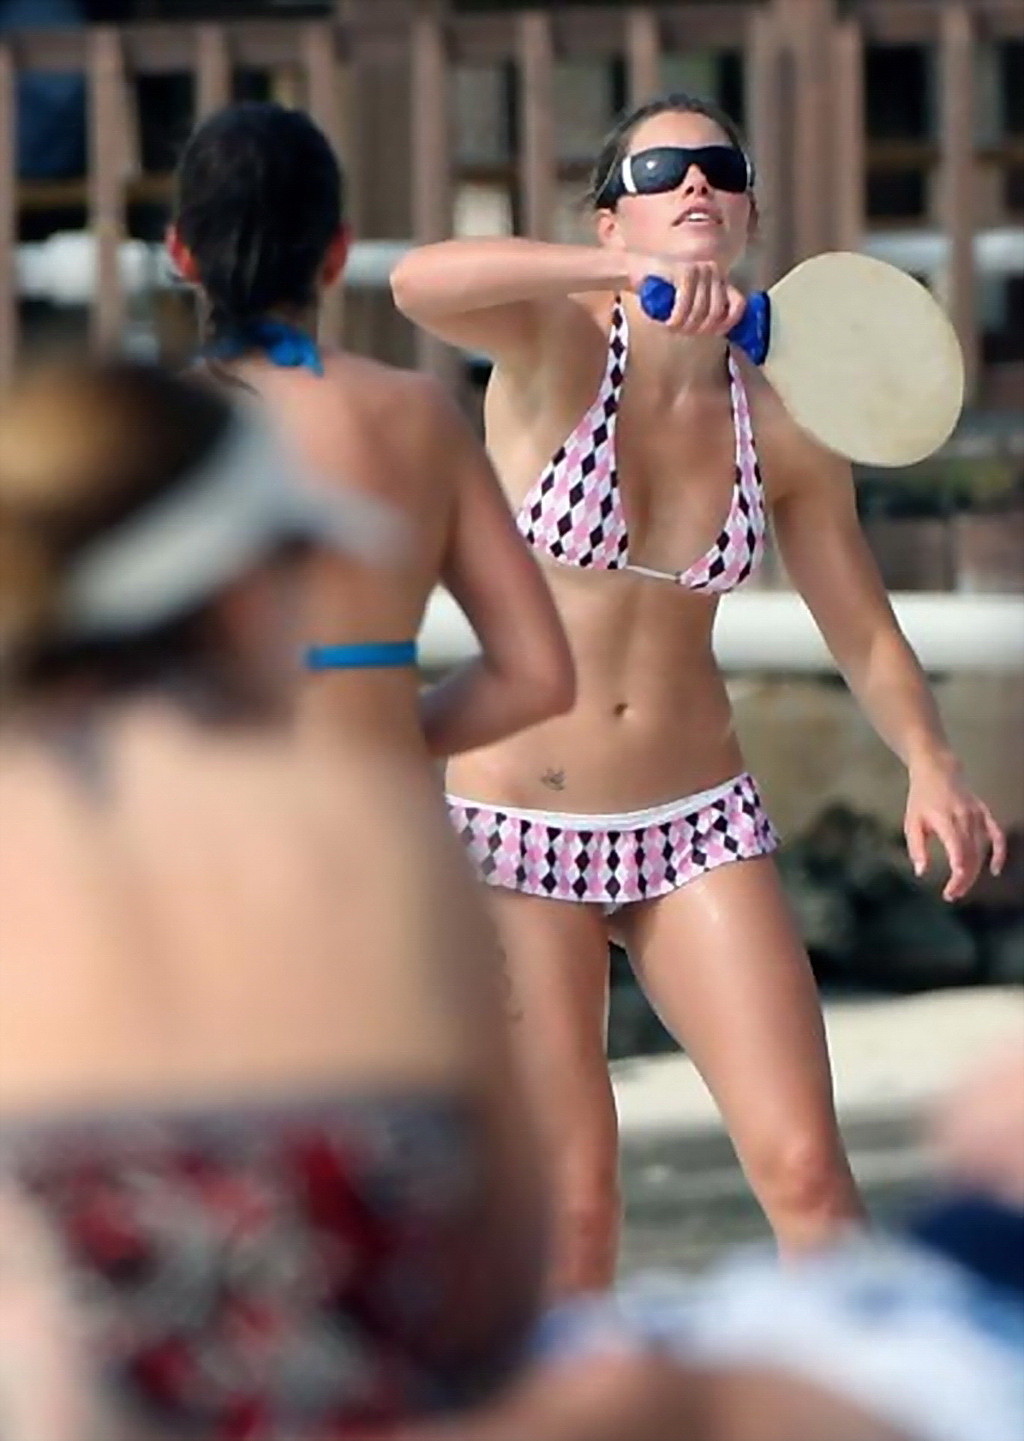 Jessica Biel looking very hot in bikini while practiced some beach sports in Pue #75258783